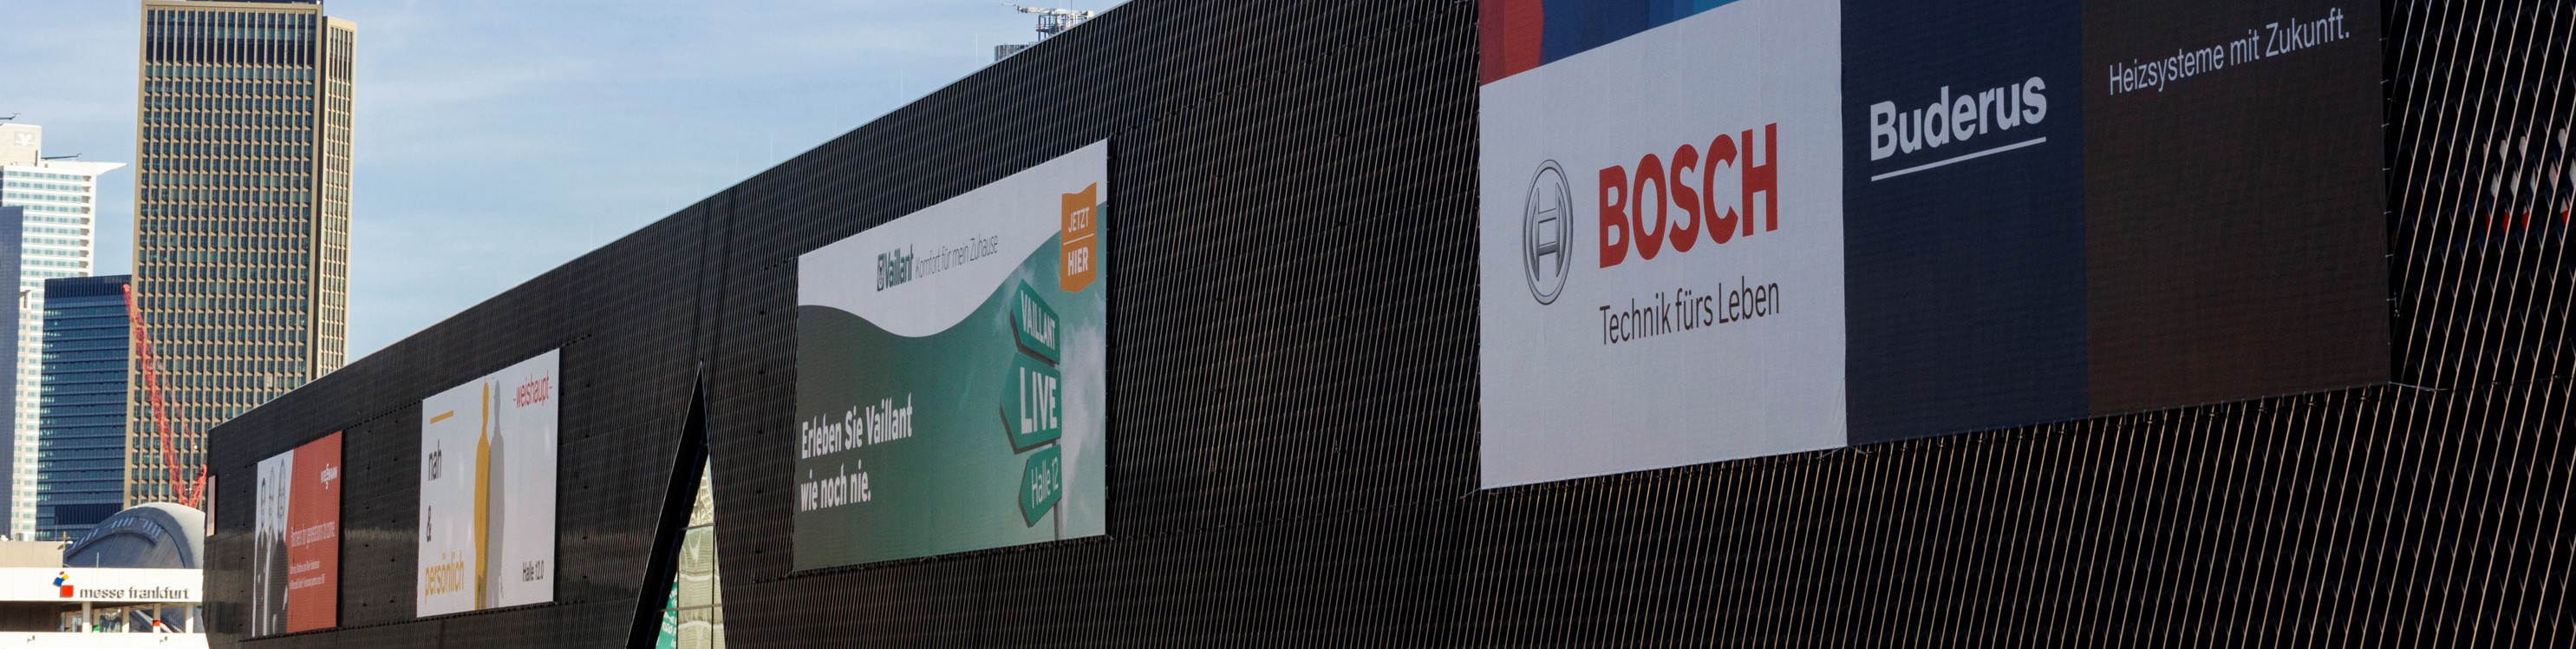 Advertising on the grounds of Messe Frankfurt